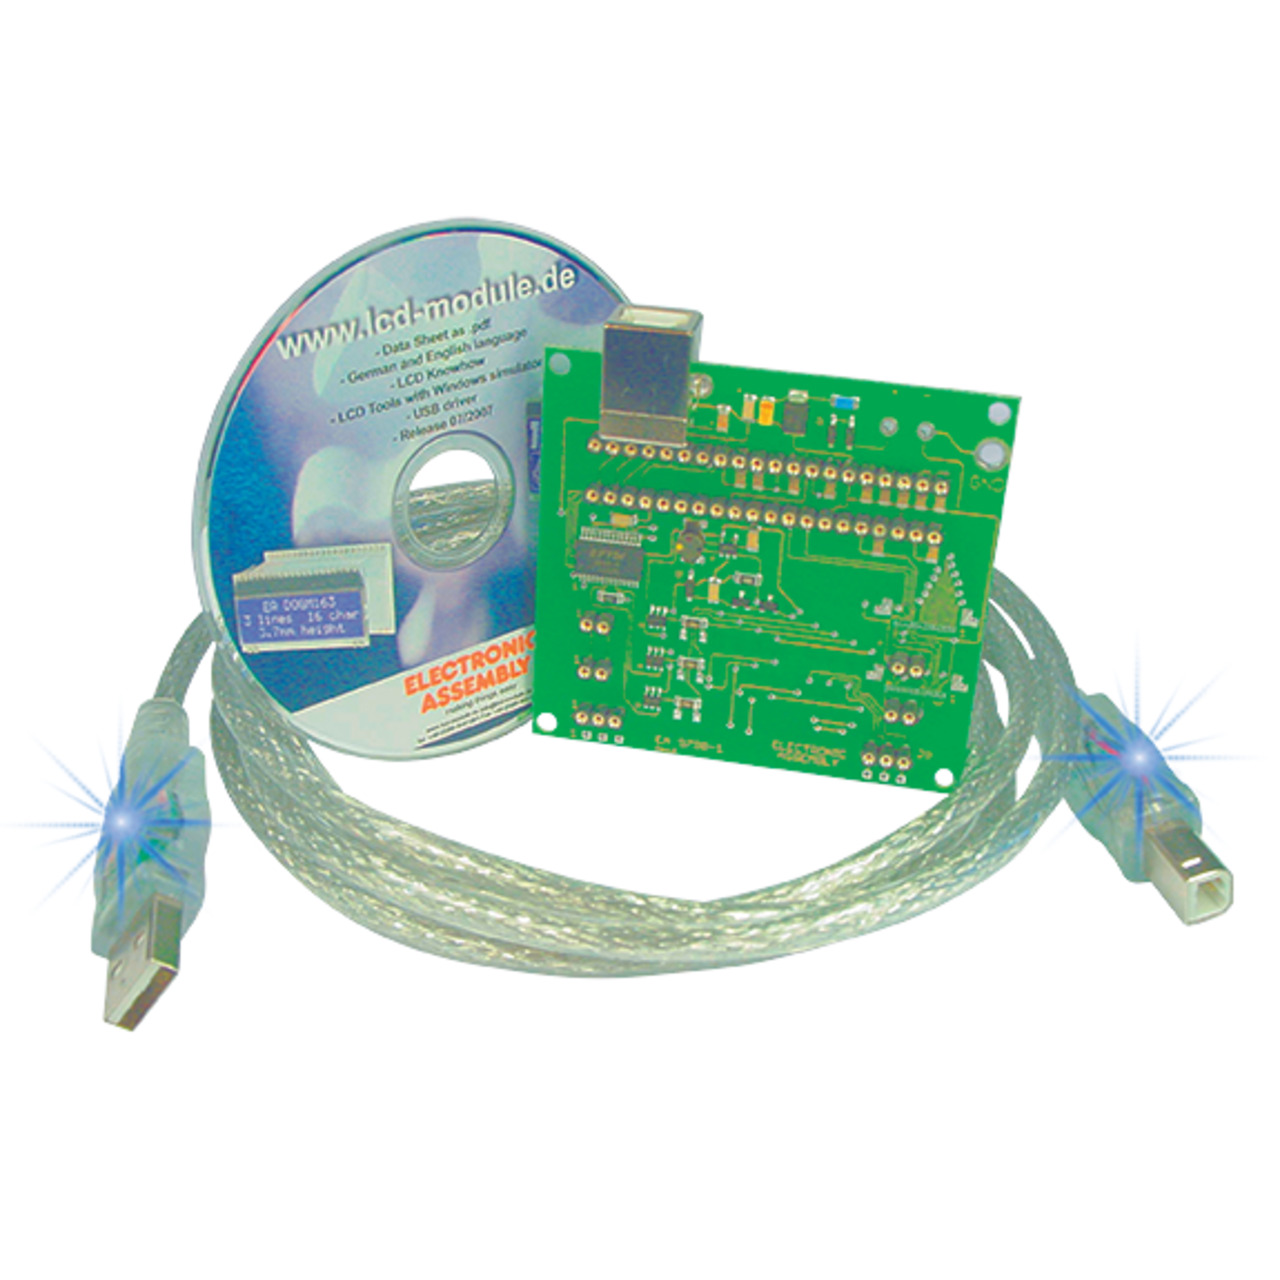 Electronic Assembly USB-Testboard fr EA DOG-Serie